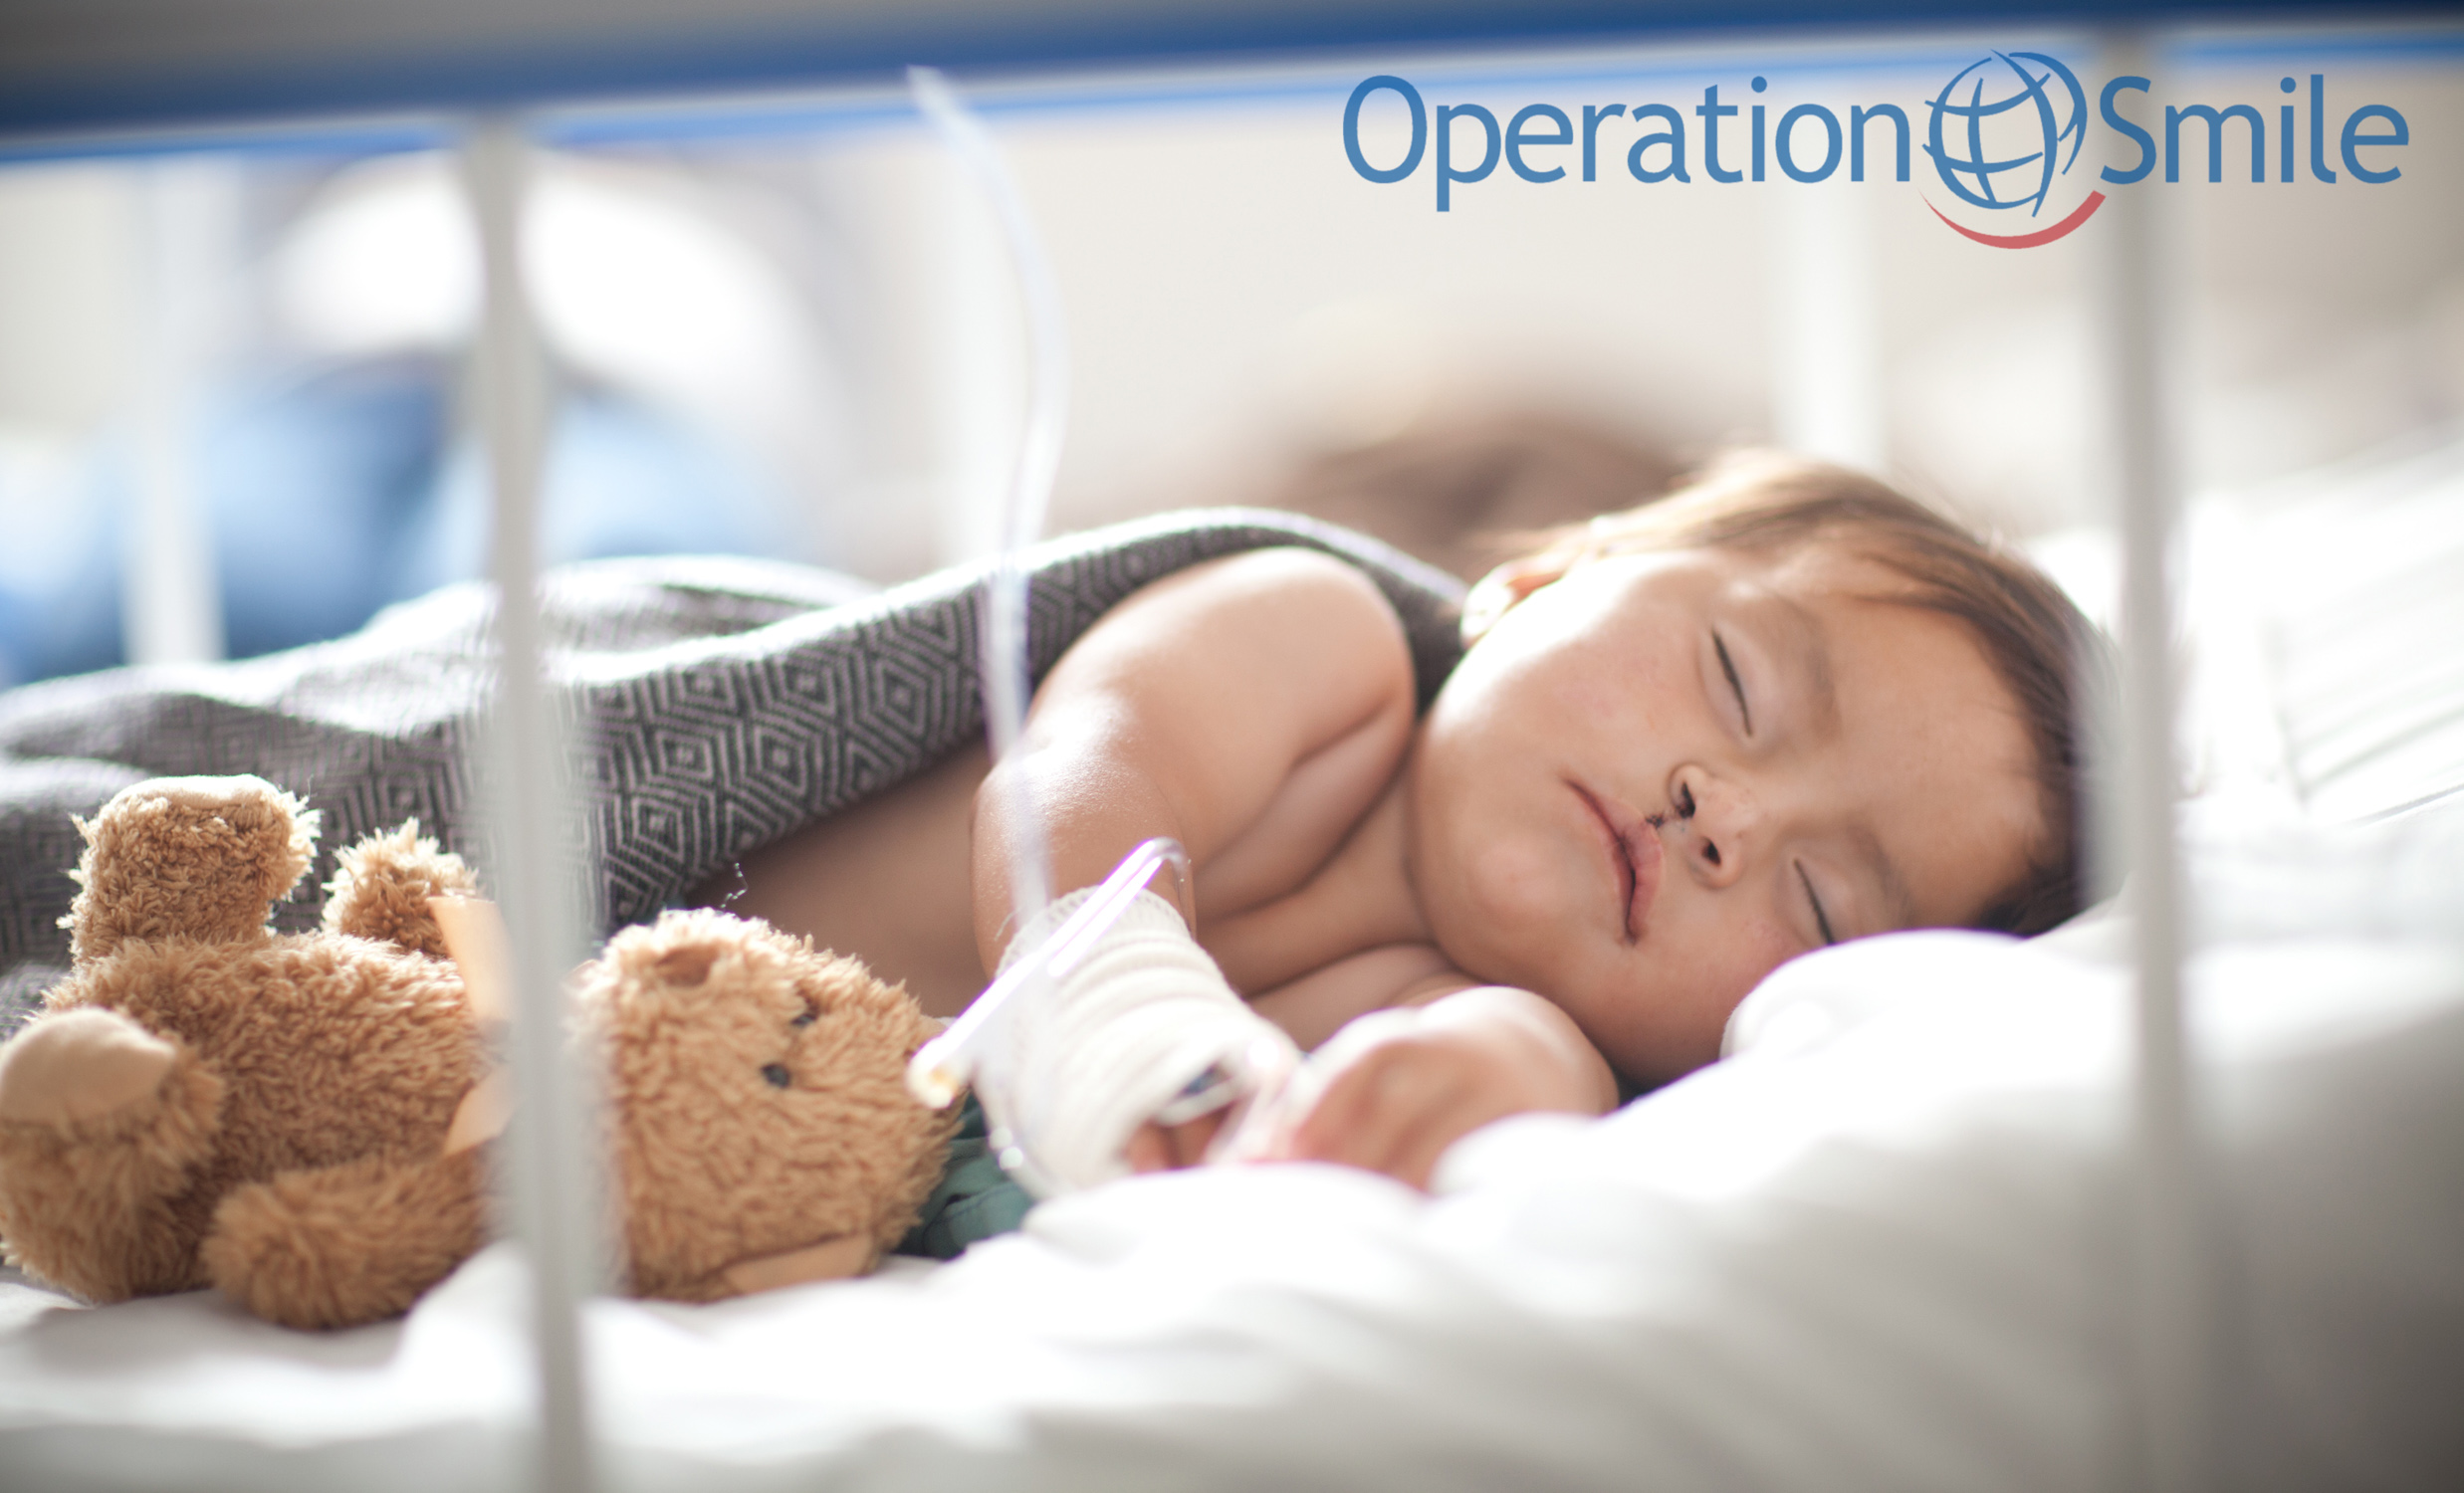 A baby recovers in a hospital bed after surgery in an Ad Campaign for Operation Smile photographed by Lifestyle Photographer Diana Mulvihill